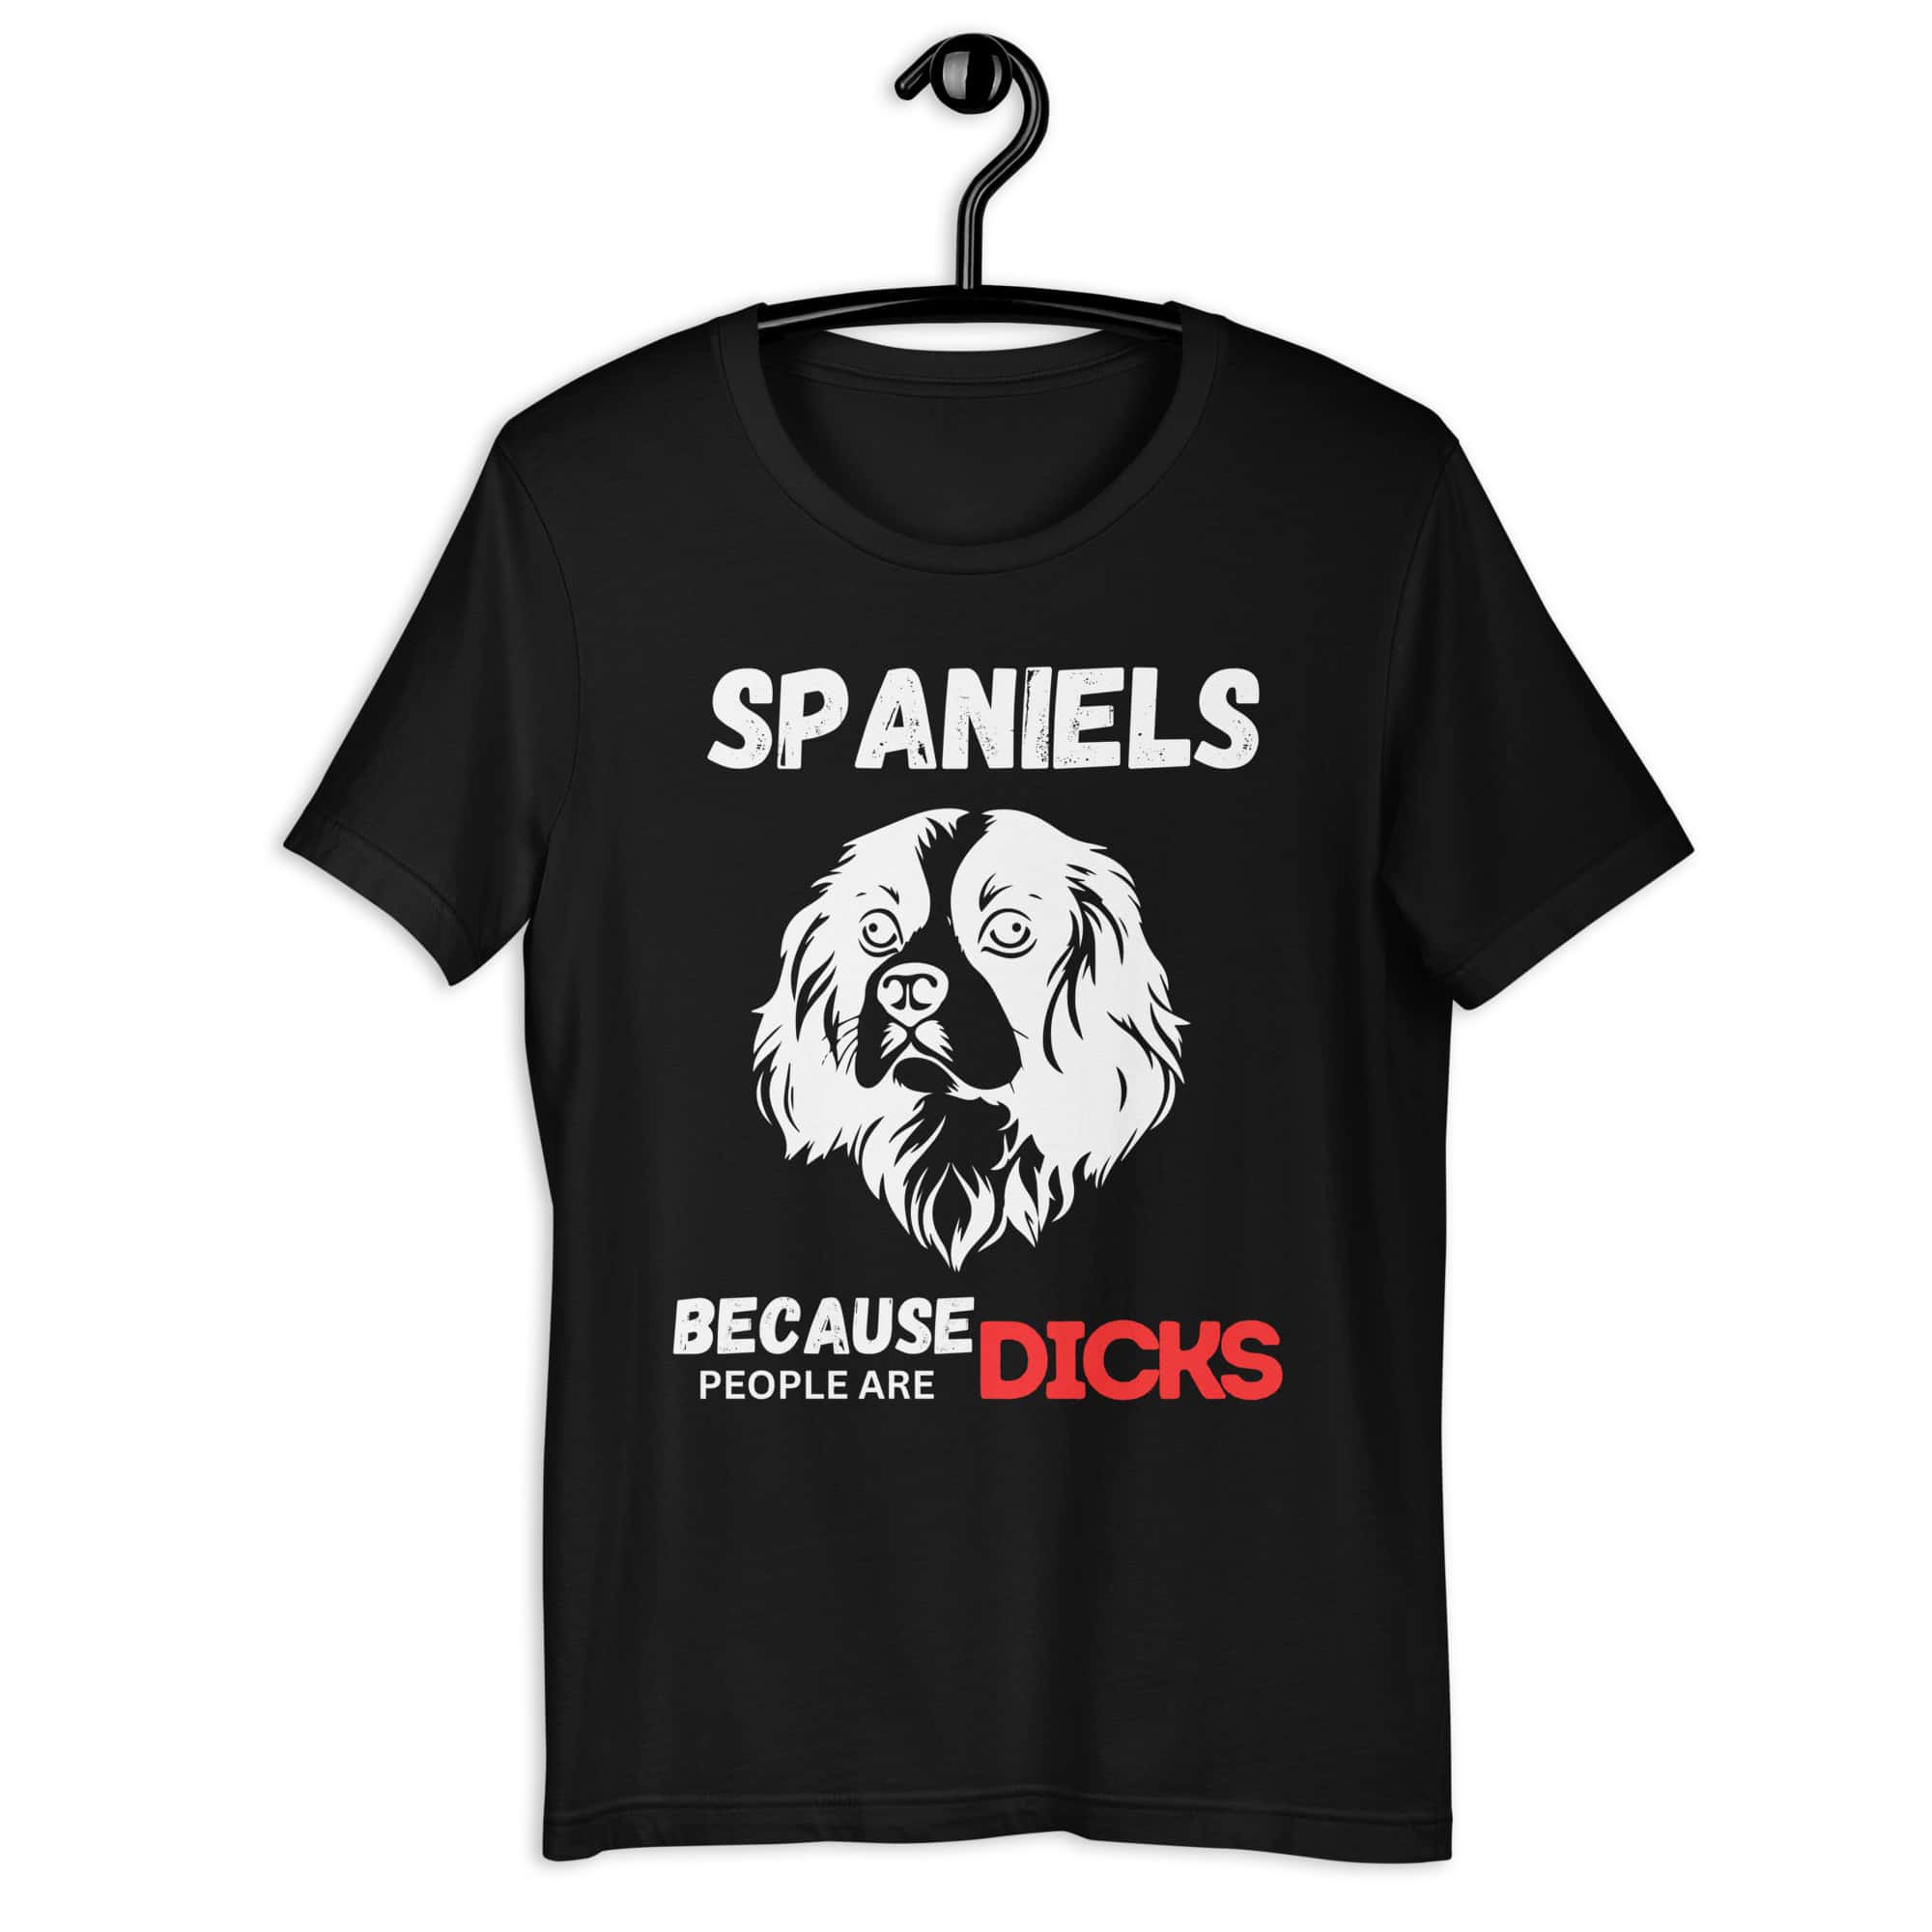 Spaniels Because People Are Dicks Unisex T-Shirt Jet Black